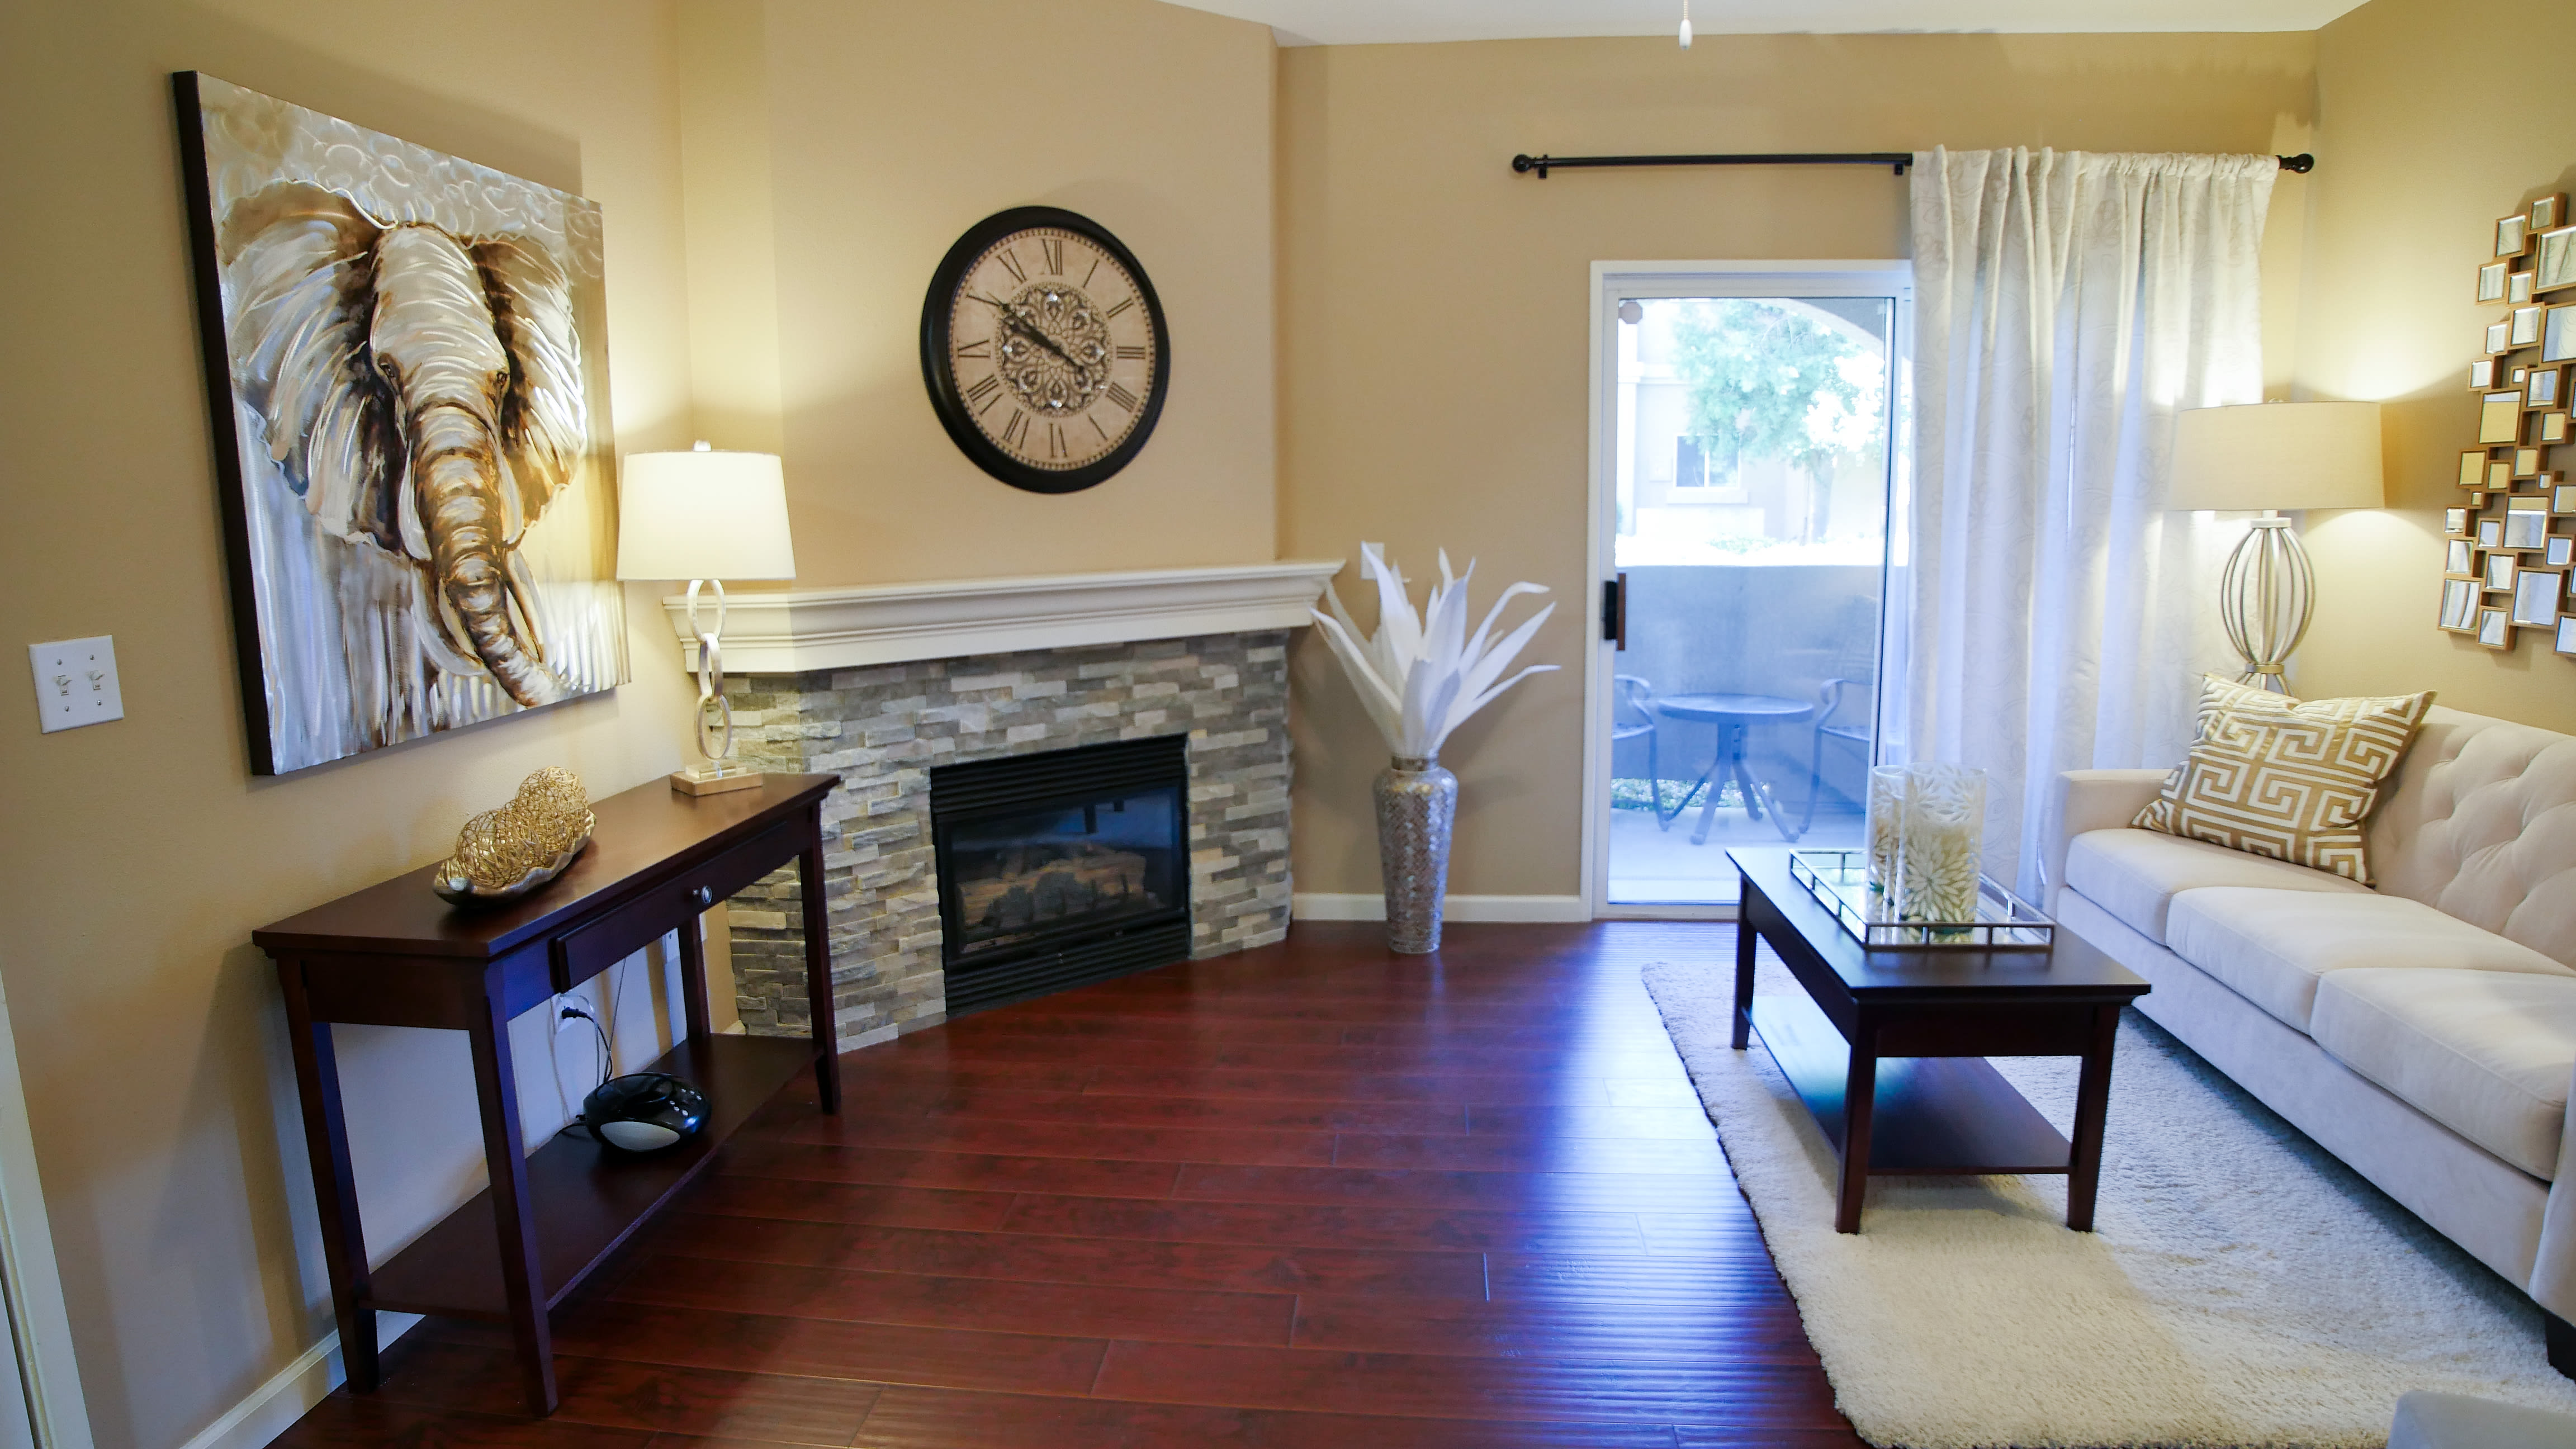 Living room with a fireplace at Vineyard Gate Apartments in Roseville, California